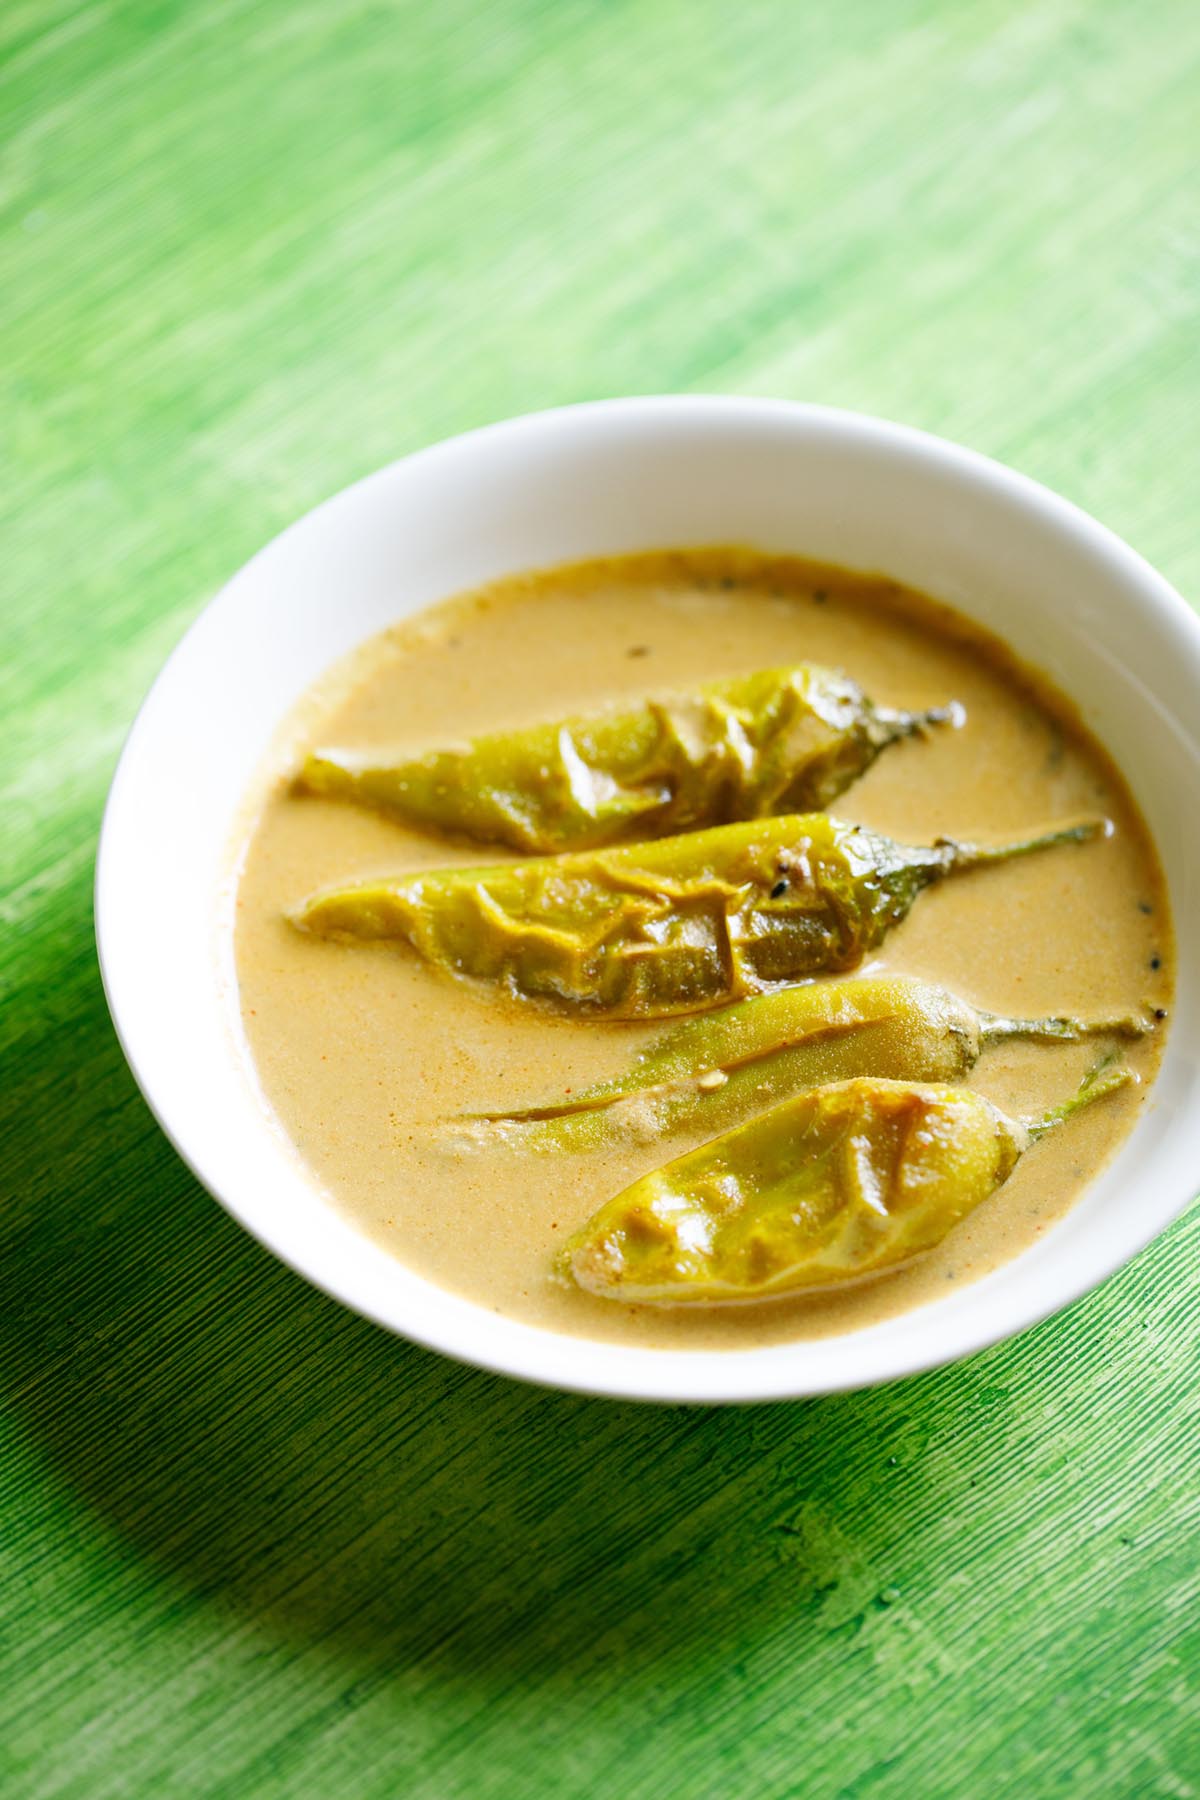 mirchi ka salan served in a white bowl on a green table.